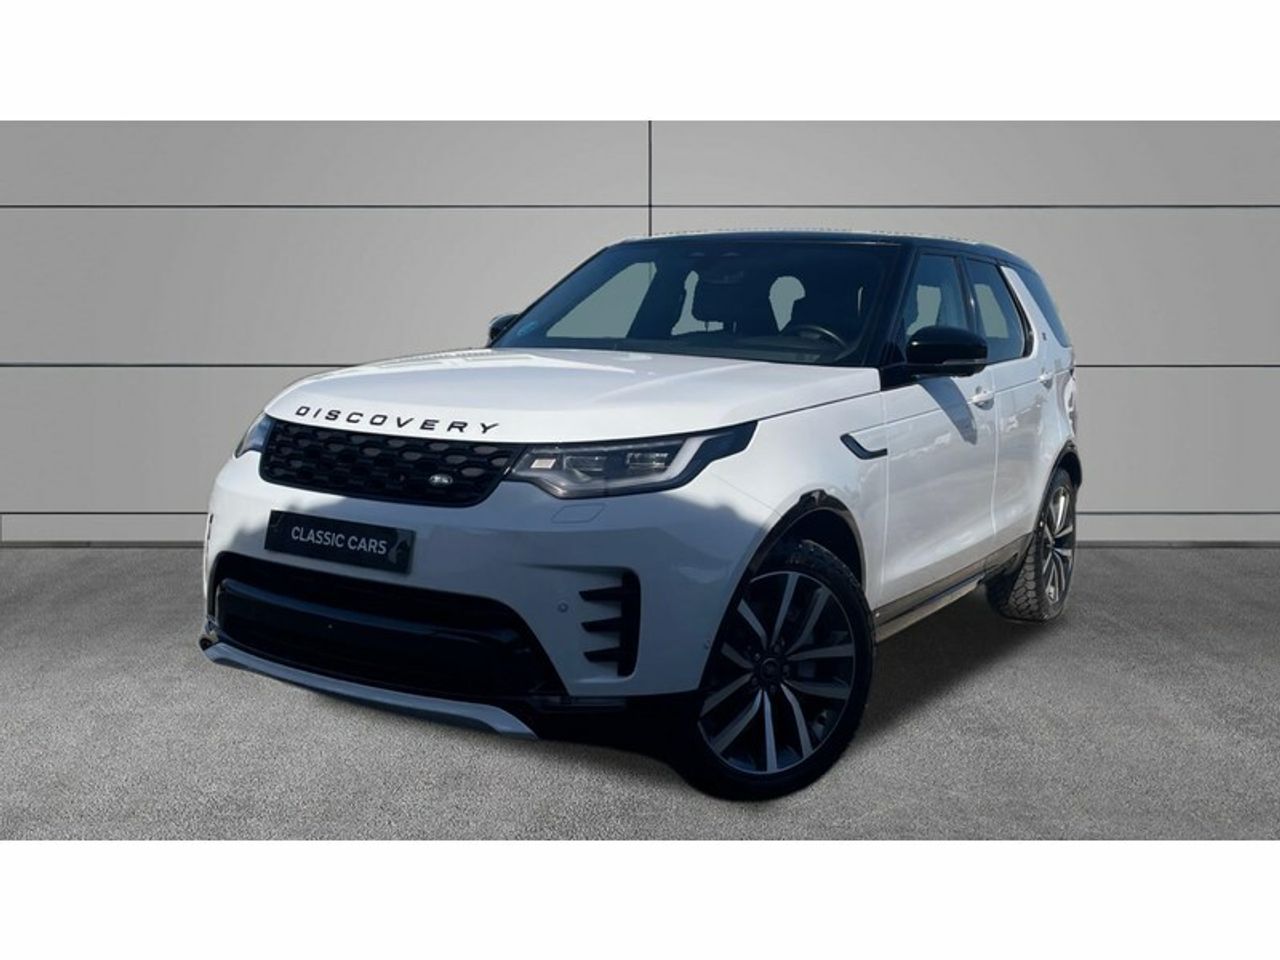 Land-rover discovery 3.0d i6 r-dynamic se awd auto 221 kw (300 cv)